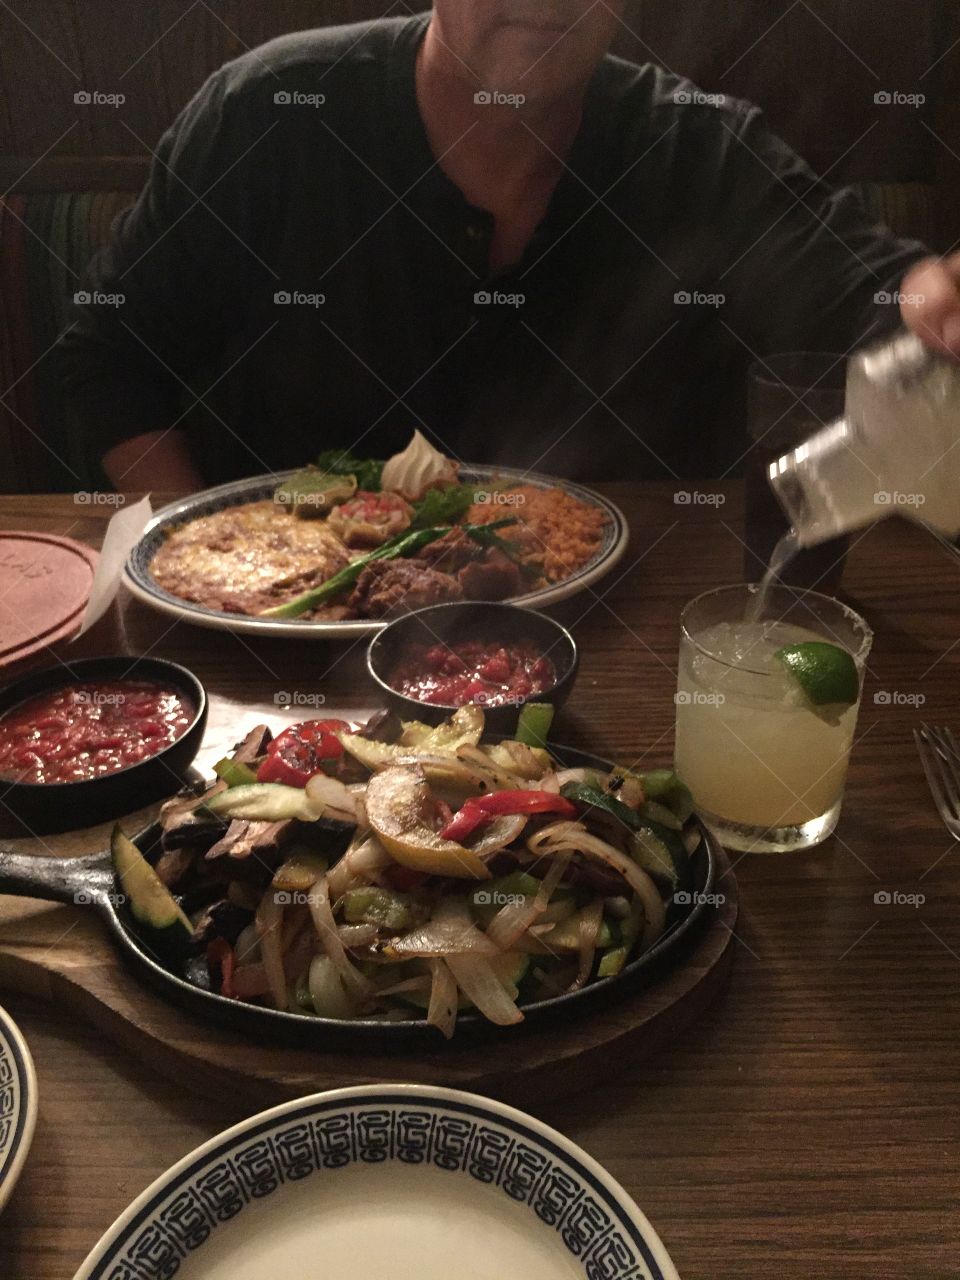 Staying warm inside with steamy hearty dinner meal of Mexican fajitas, rice, beans, veggies, and margarita cocktail mixed drink